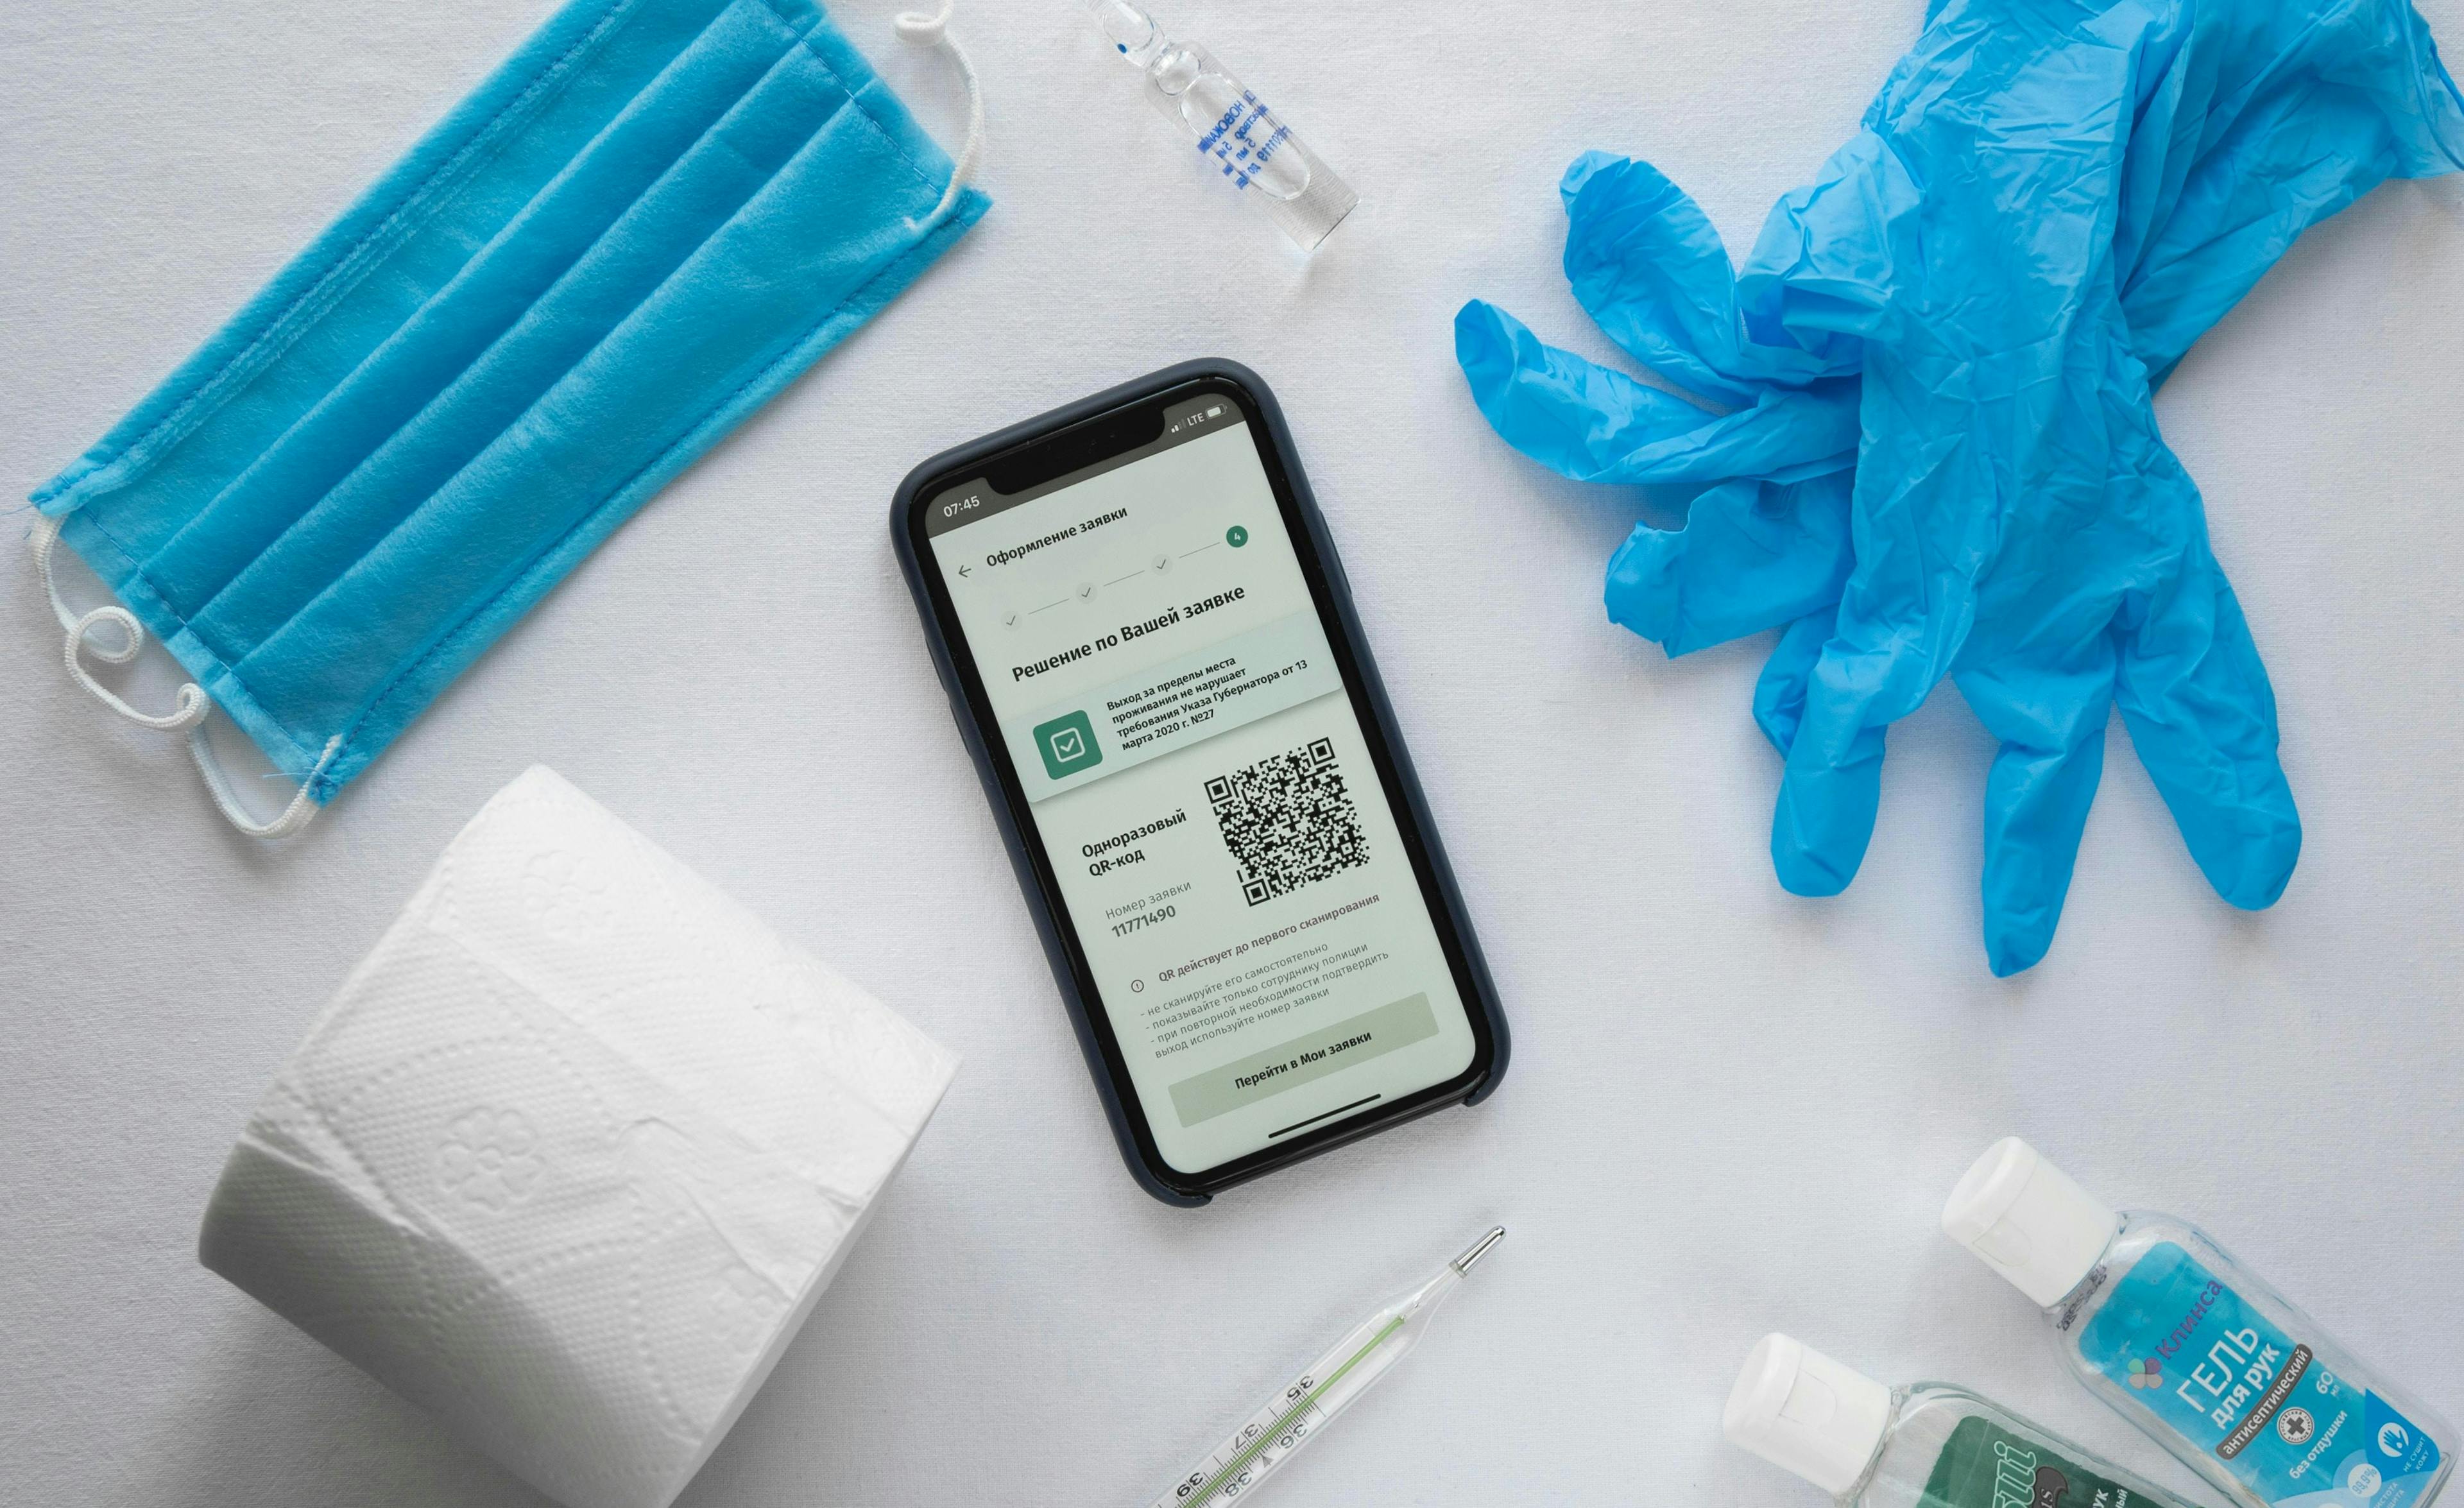 A smartphone displays a QR code among a blue face mask, blue gloves, a roll of toilet paper, medical ampoule, thermometer, and hand sanitizers on a white surface.